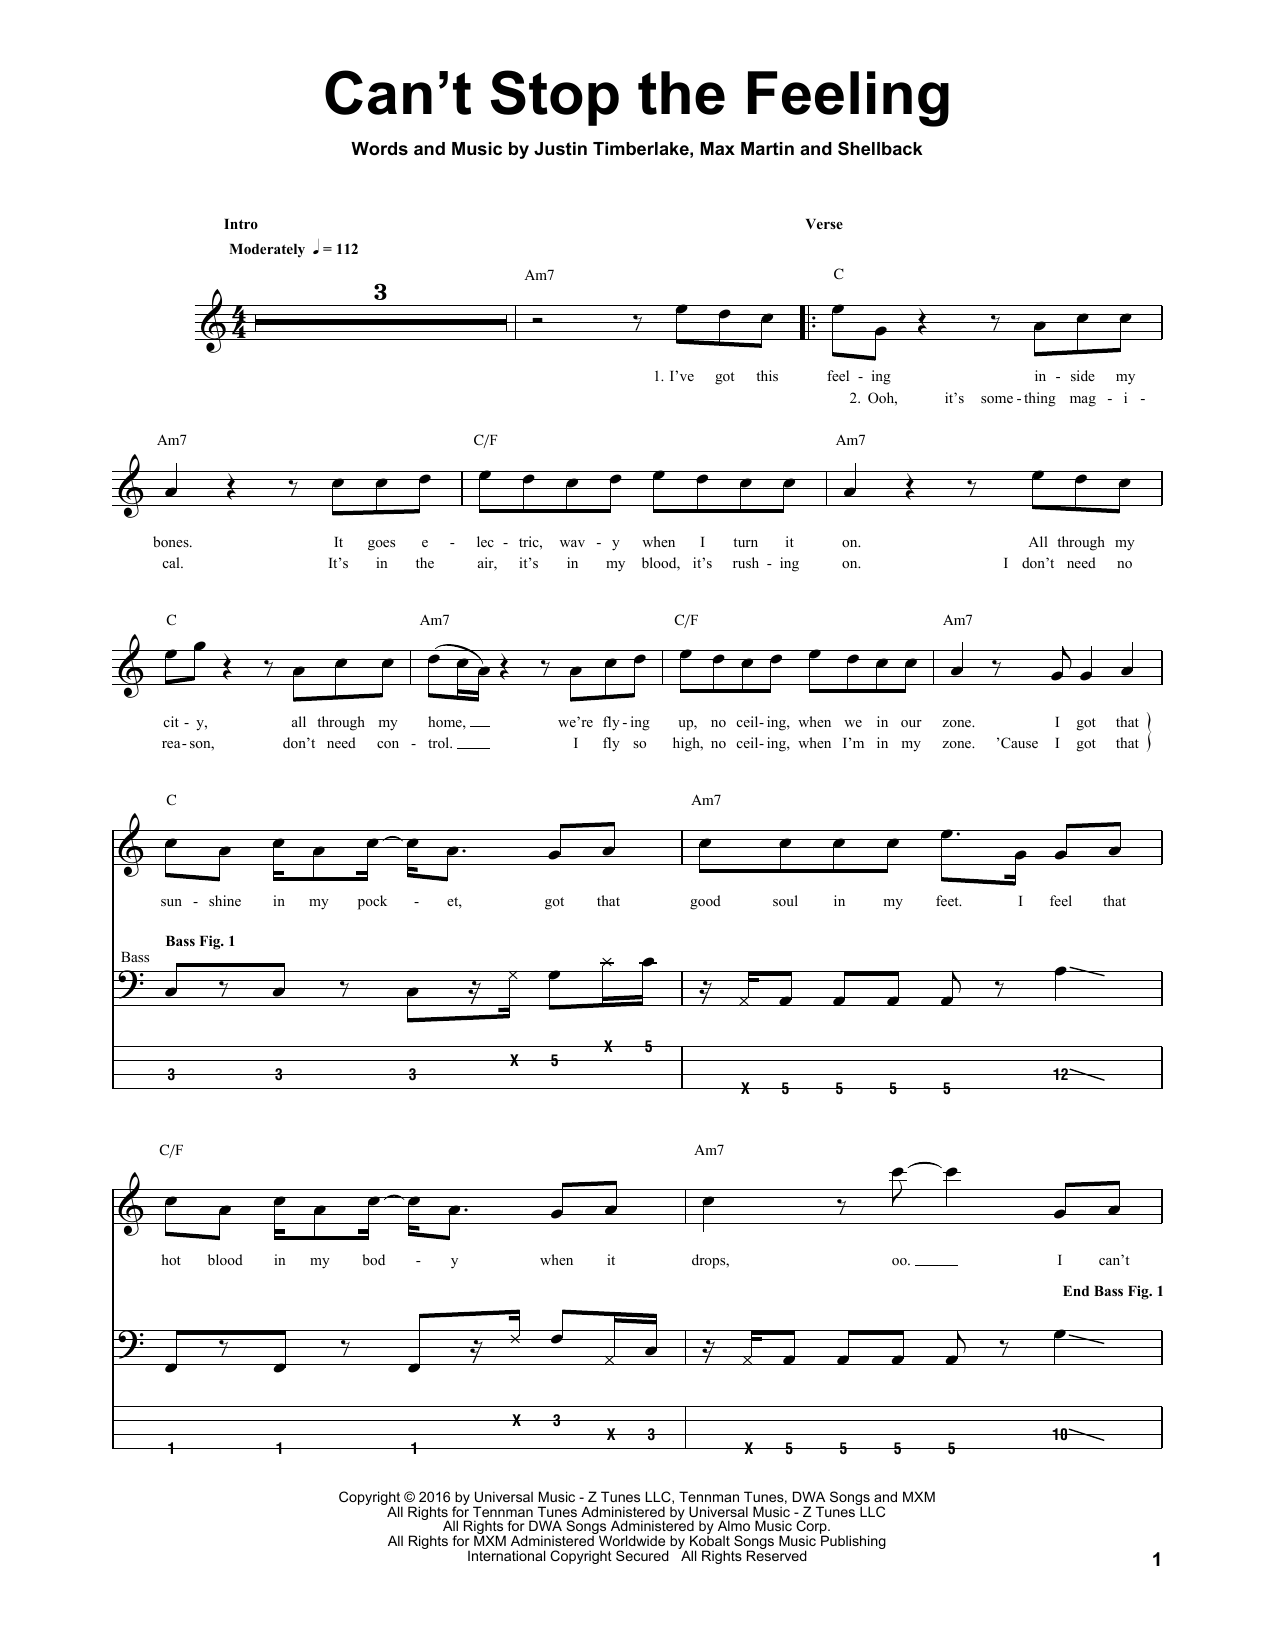 Cant stop the feeling bass transcription pdf